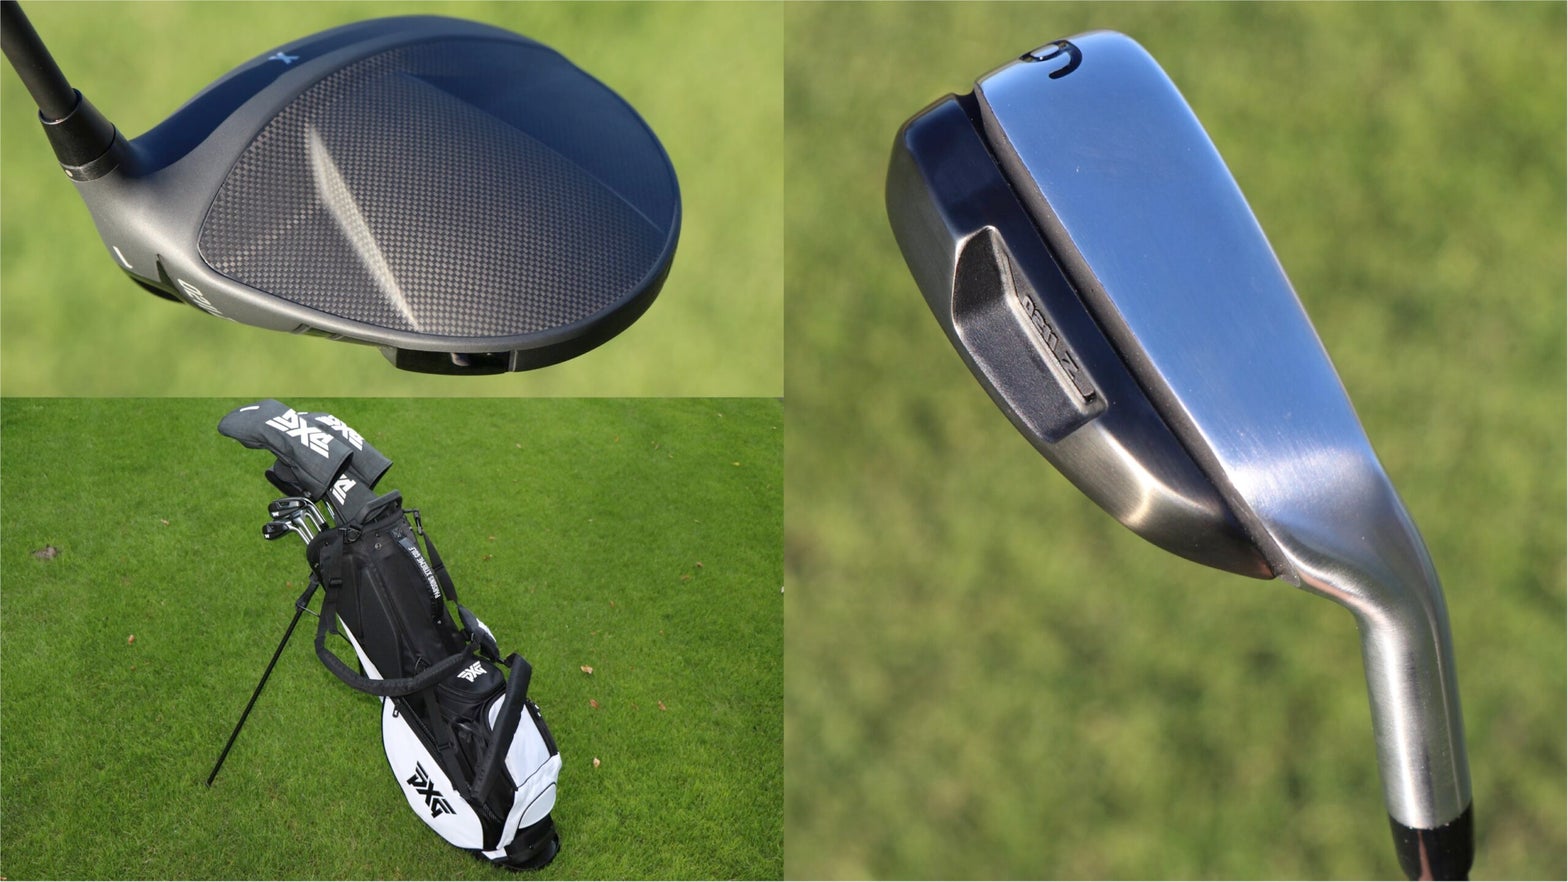 PXG's 0211 Z set made to help beginners hit it farther